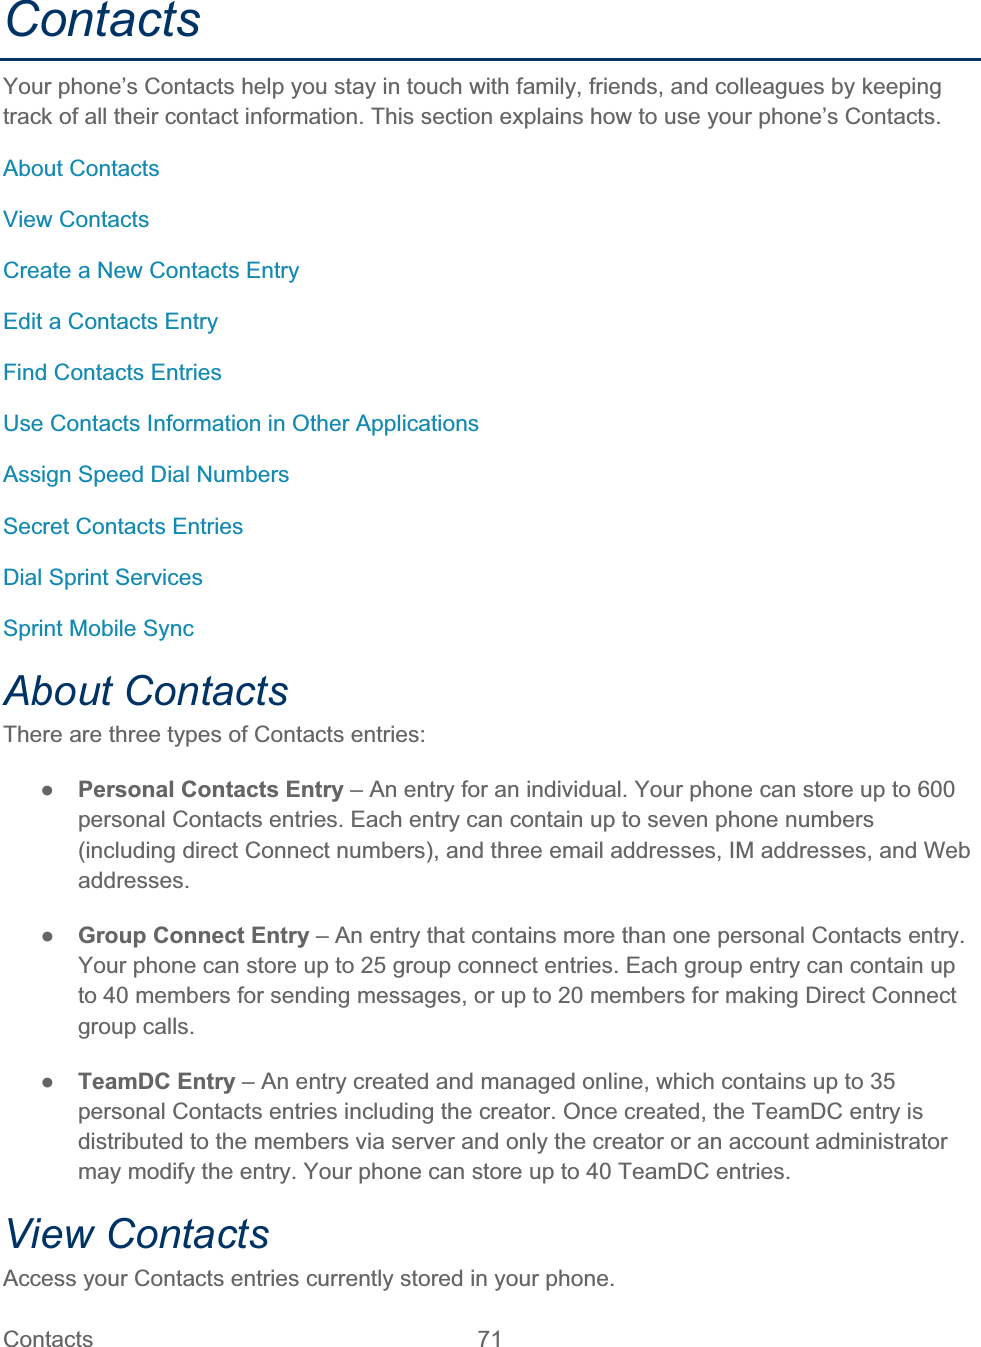 Contacts   71   ContactsYour phone’s Contacts help you stay in touch with family, friends, and colleagues by keeping track of all their contact information. This section explains how to use your phone’s Contacts. About Contacts View Contacts Create a New Contacts Entry Edit a Contacts Entry Find Contacts Entries Use Contacts Information in Other Applications Assign Speed Dial Numbers Secret Contacts Entries Dial Sprint Services Sprint Mobile Sync About Contacts There are three types of Contacts entries: ŏPersonal Contacts Entry – An entry for an individual. Your phone can store up to 600 personal Contacts entries. Each entry can contain up to seven phone numbers (including direct Connect numbers), and three email addresses, IM addresses, and Web addresses. ŏGroup Connect Entry – An entry that contains more than one personal Contacts entry. Your phone can store up to 25 group connect entries. Each group entry can contain up to 40 members for sending messages, or up to 20 members for making Direct Connect group calls. ŏTeamDC Entry – An entry created and managed online, which contains up to 35 personal Contacts entries including the creator. Once created, the TeamDC entry is distributed to the members via server and only the creator or an account administrator may modify the entry. Your phone can store up to 40 TeamDC entries. View Contacts Access your Contacts entries currently stored in your phone. 